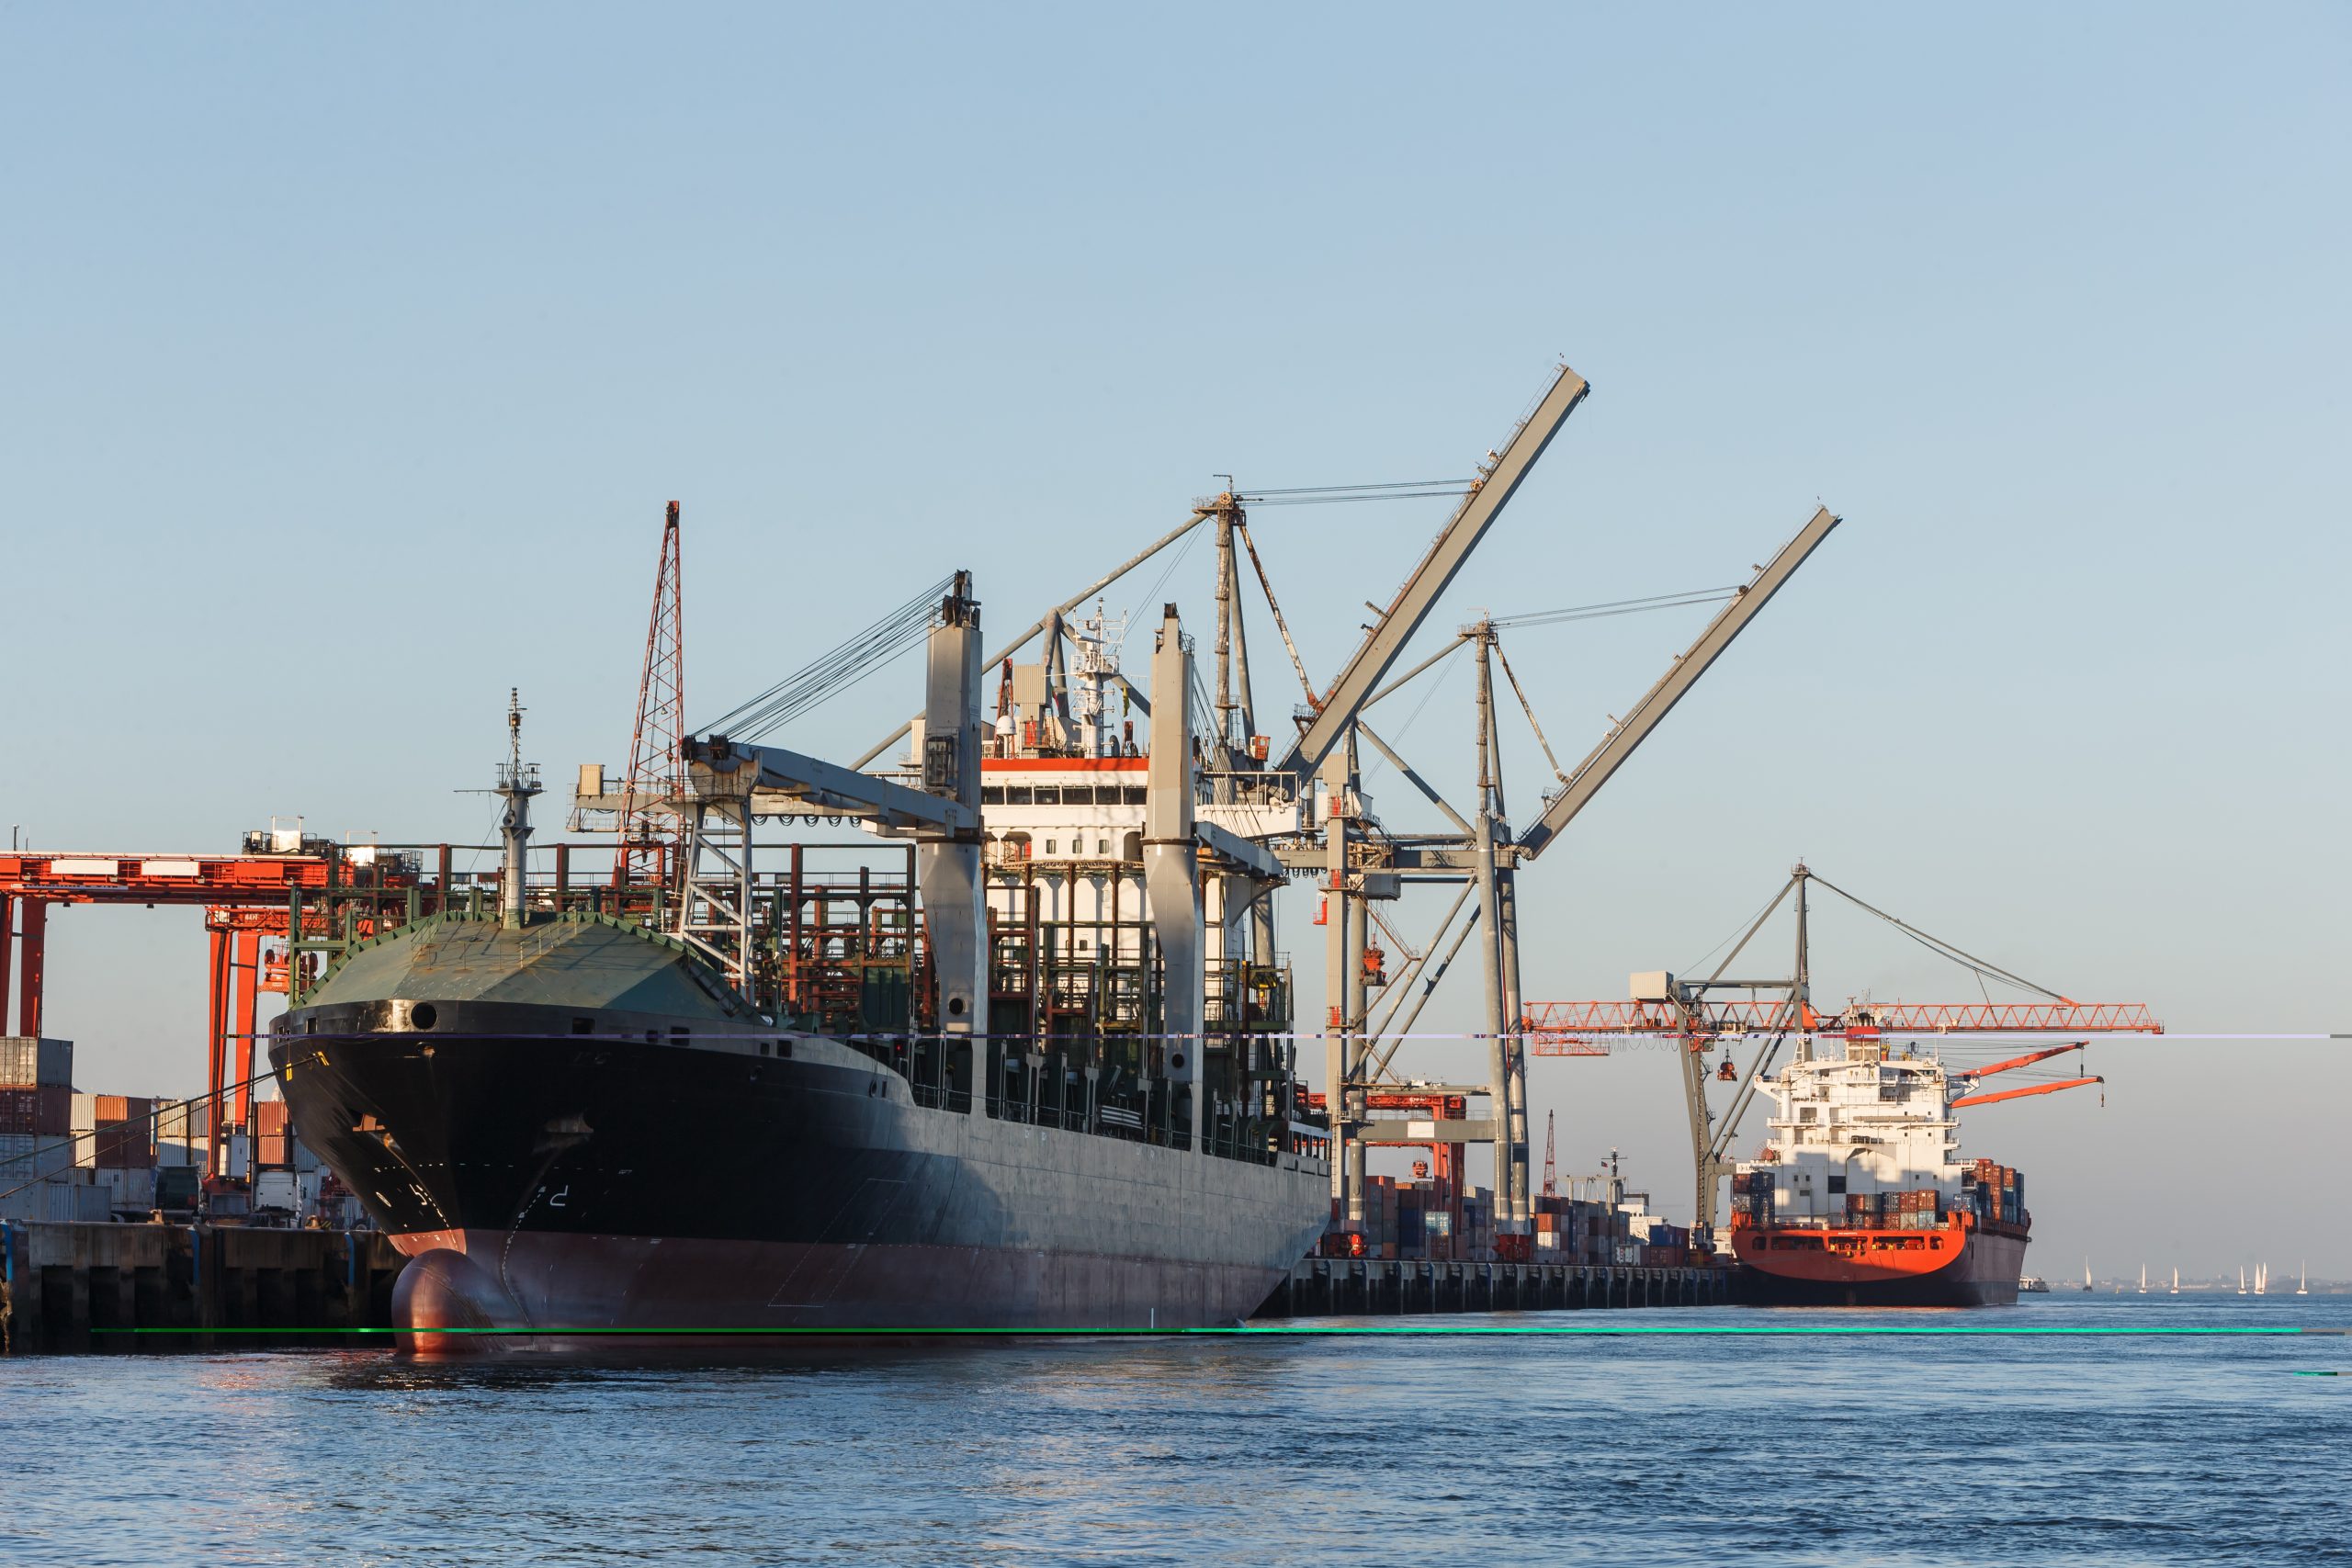 Cargo ships in port being loaded